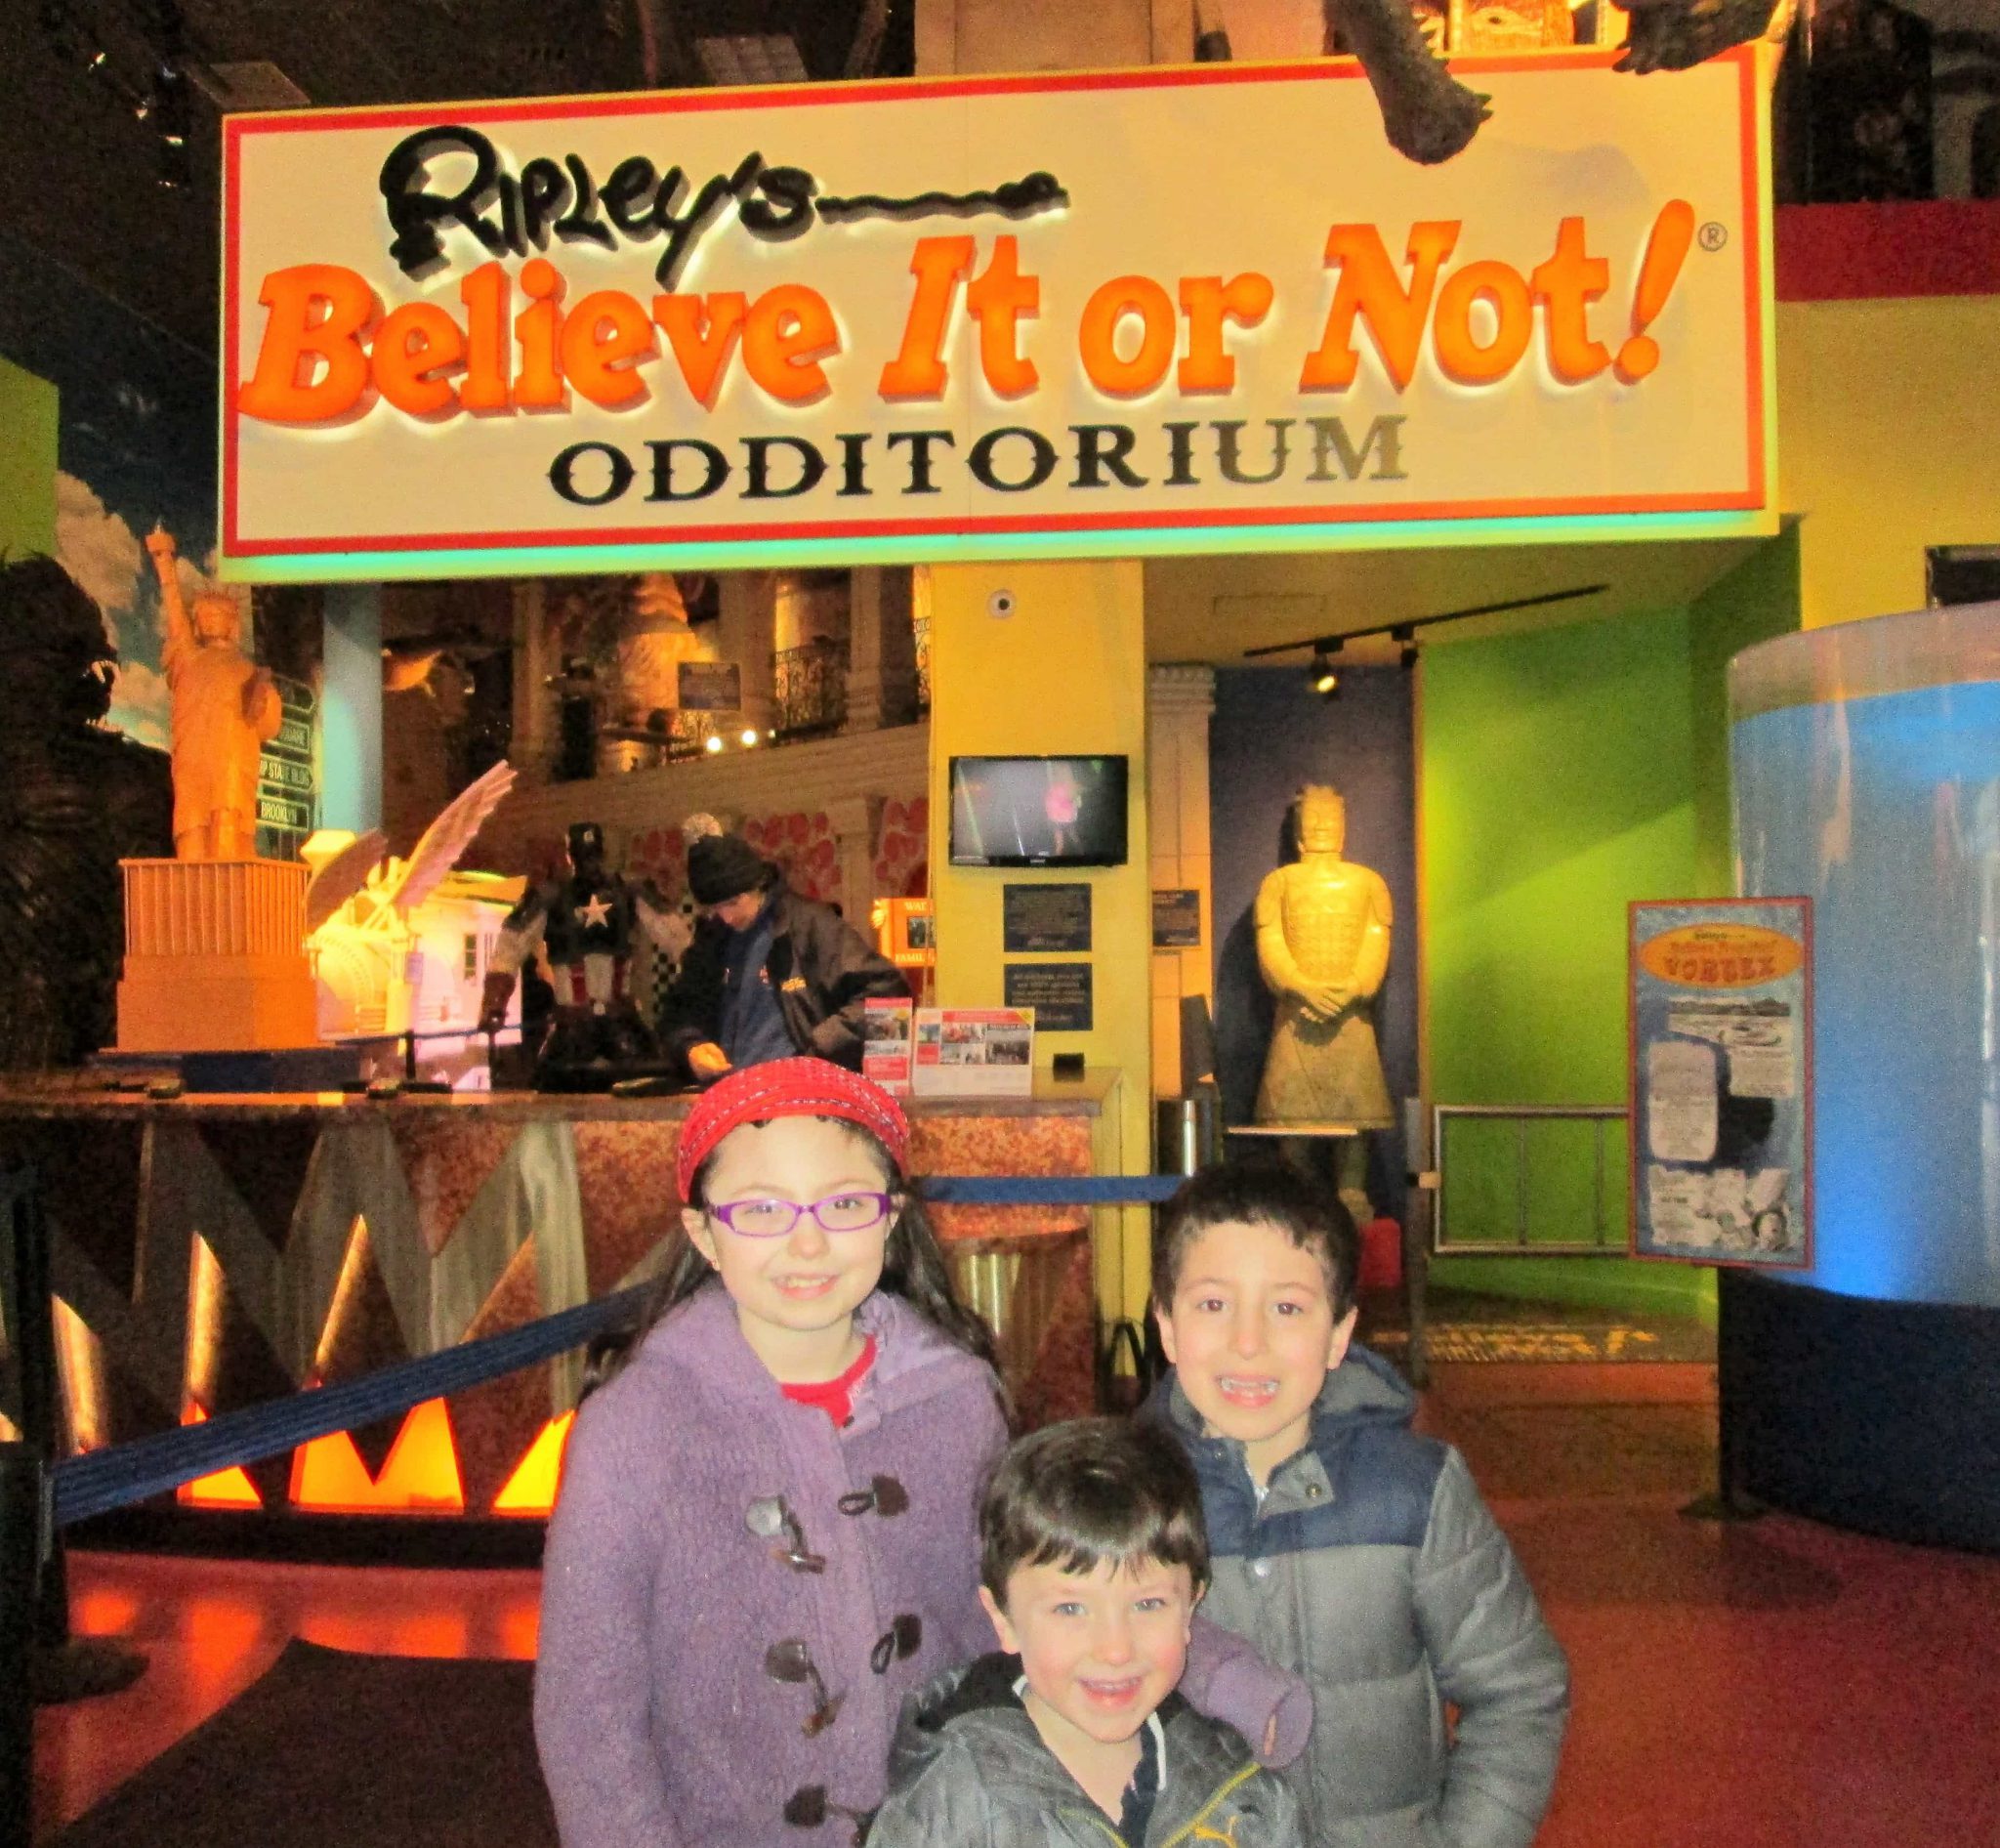 Visiting Ripley's Believe It or Not! in Times Square, NYC